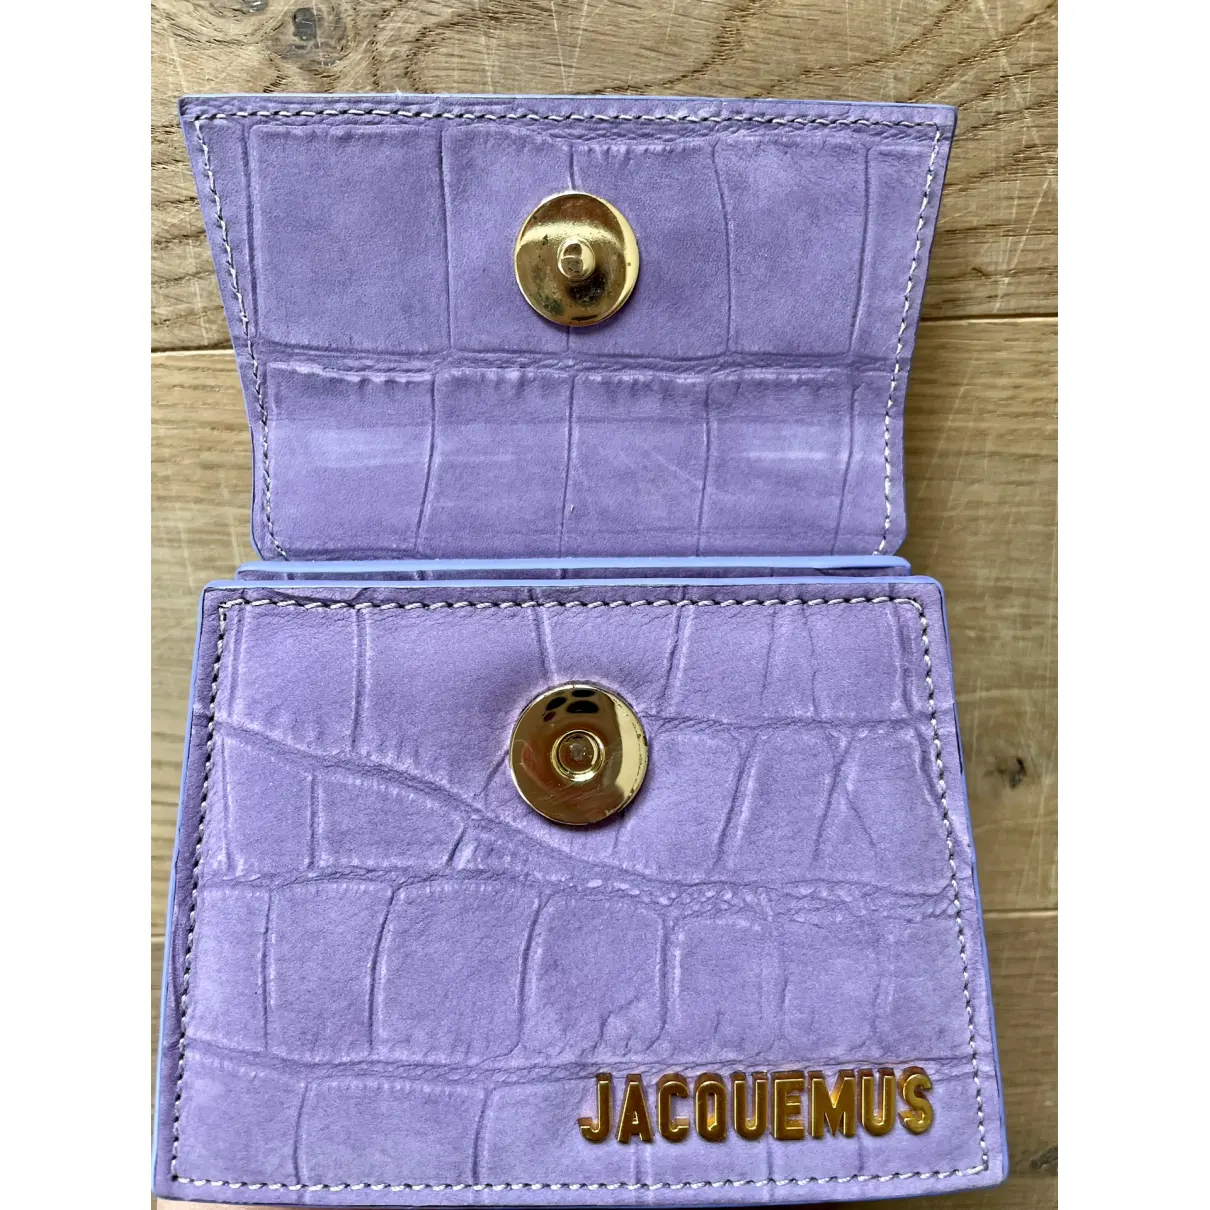 Buy Jacquemus Leather clutch bag online